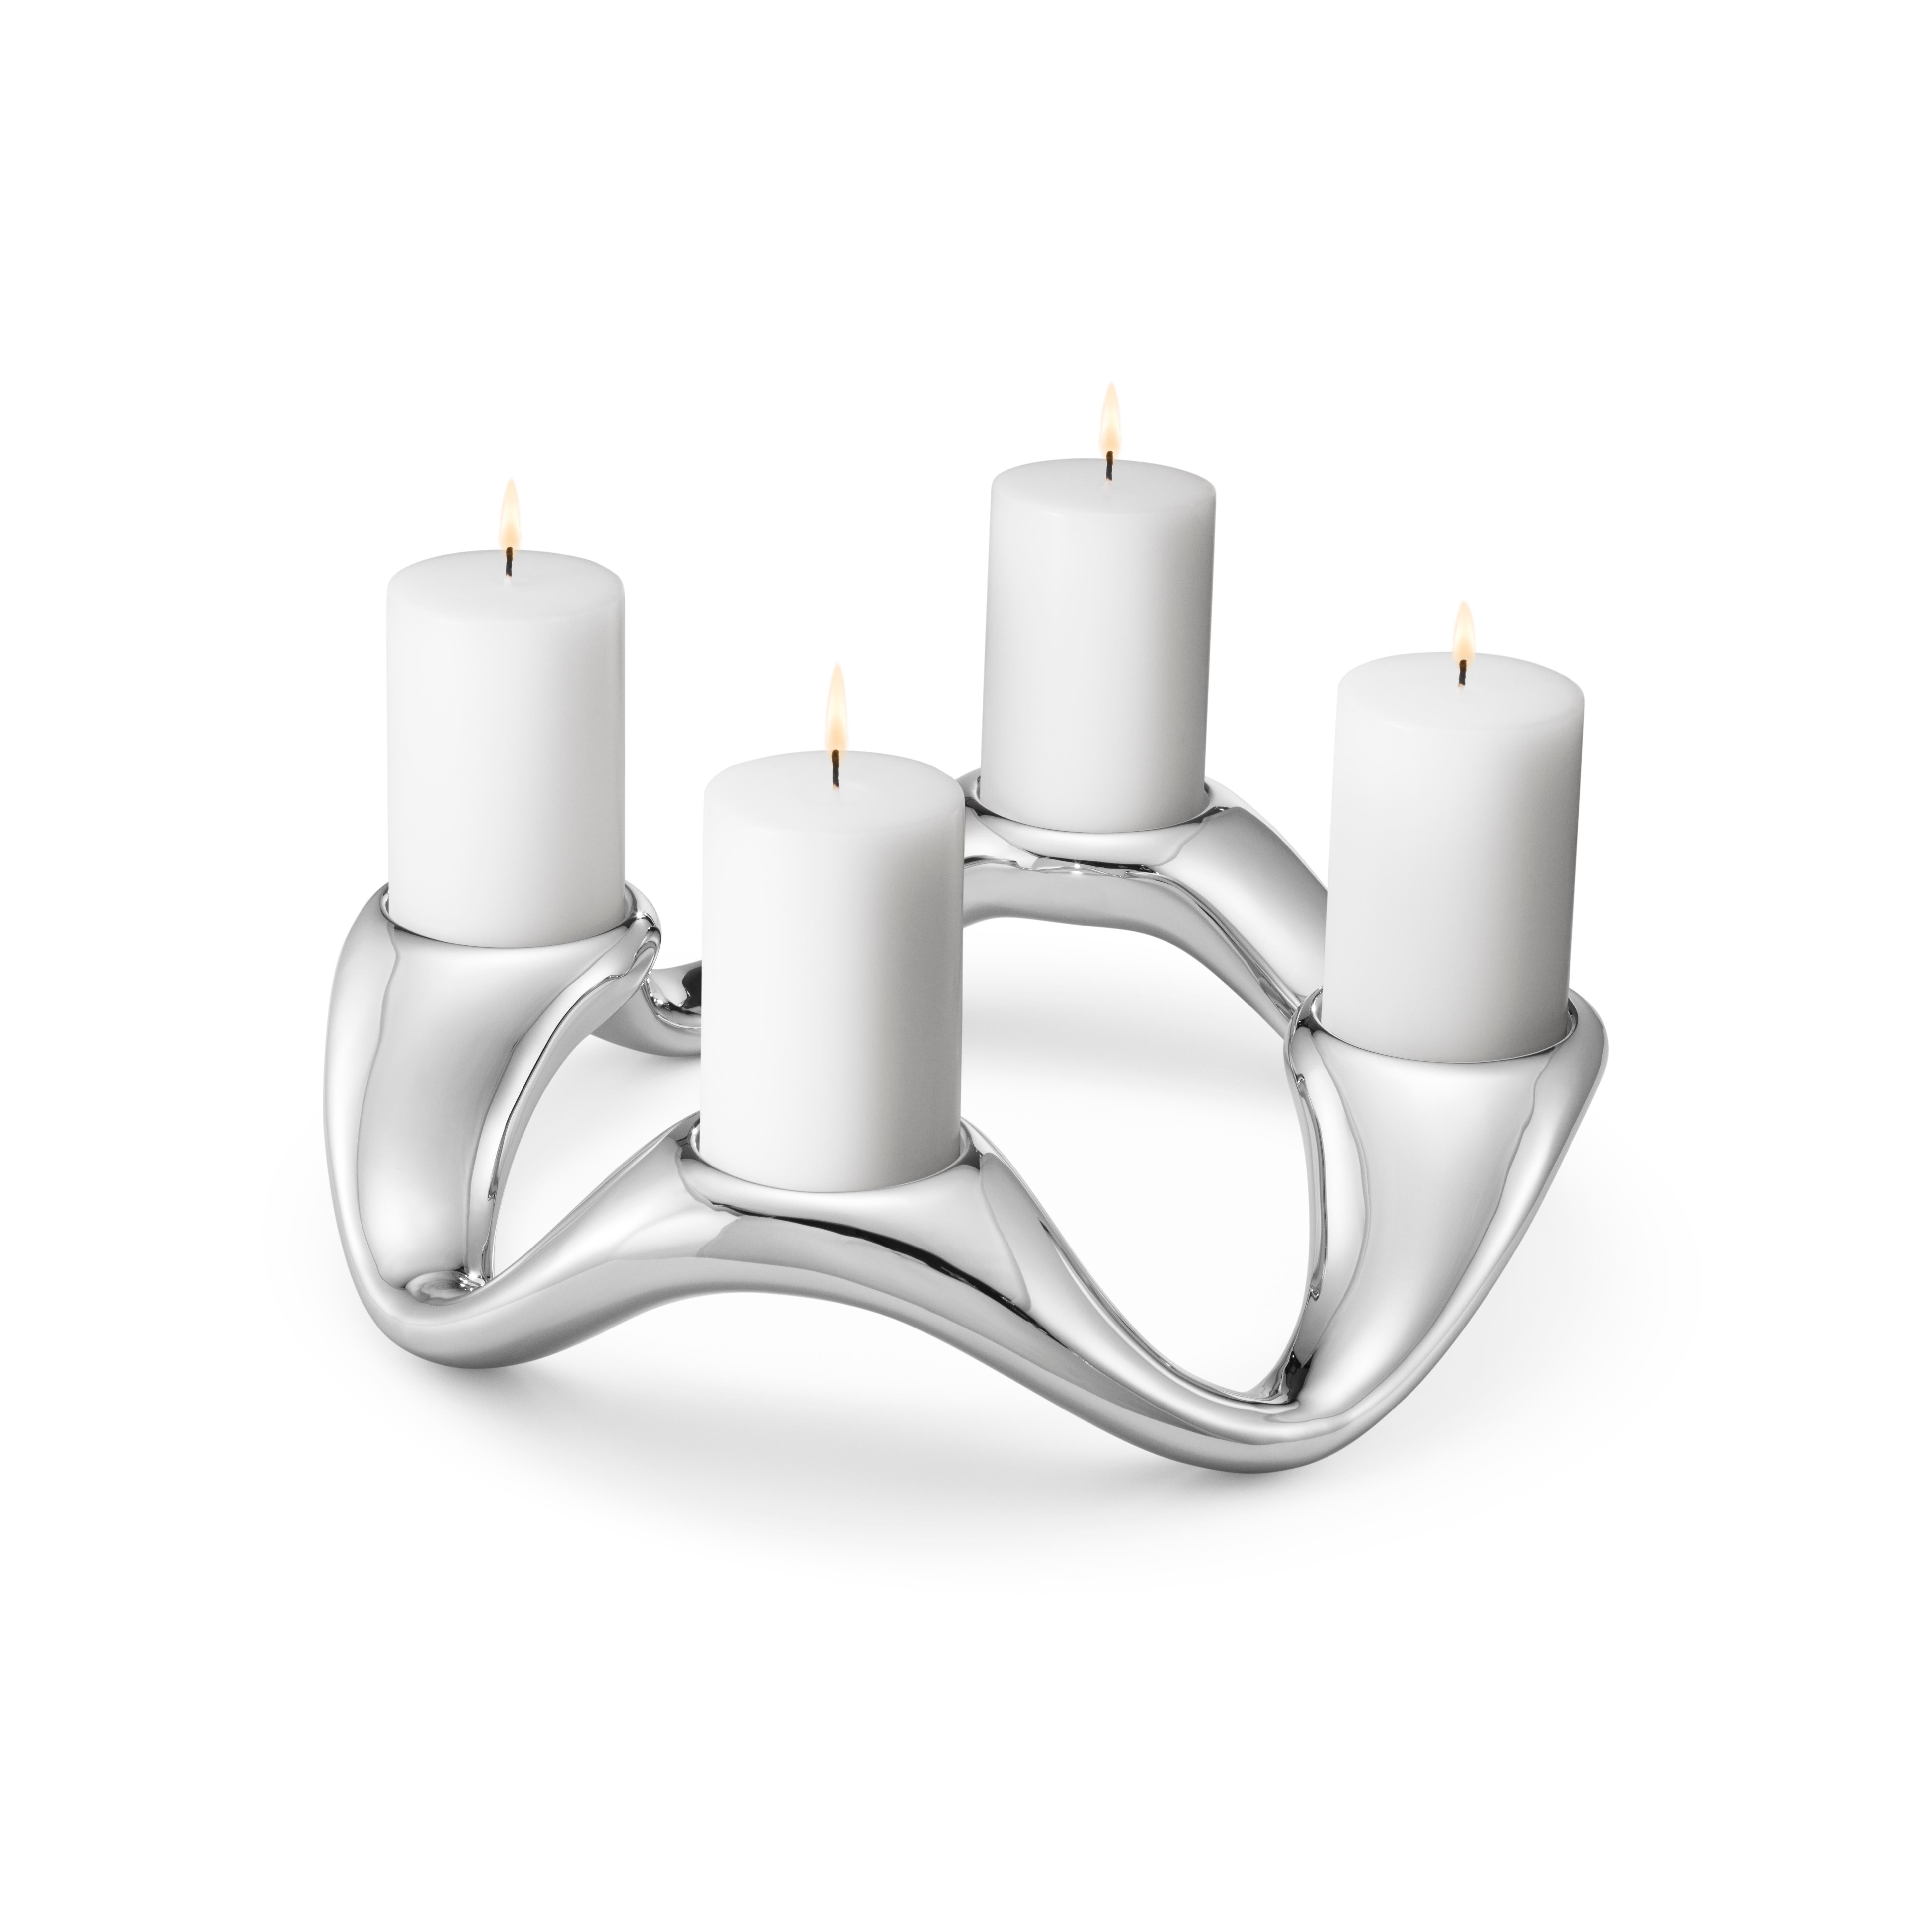 Truly capturing a sense of fluidity and movement, this sculptural stainless steel candle holder makes a striking centrepiece to a table, especially when the candlelight is reflected back on the undulating shiny surface. Holding four pillar candles,